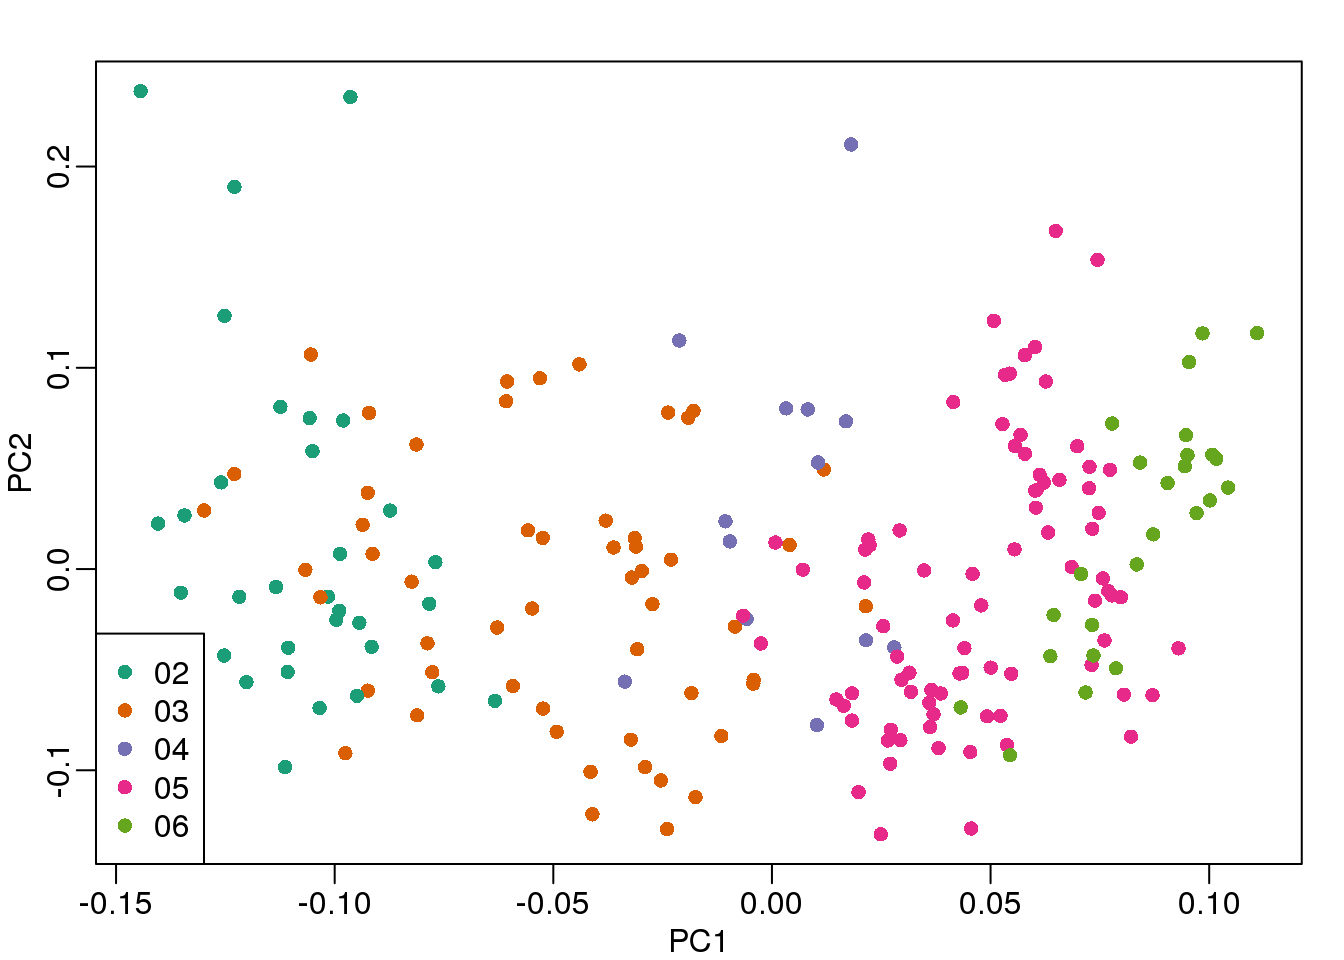 First two PCs for gene expression data with color representing processing year.